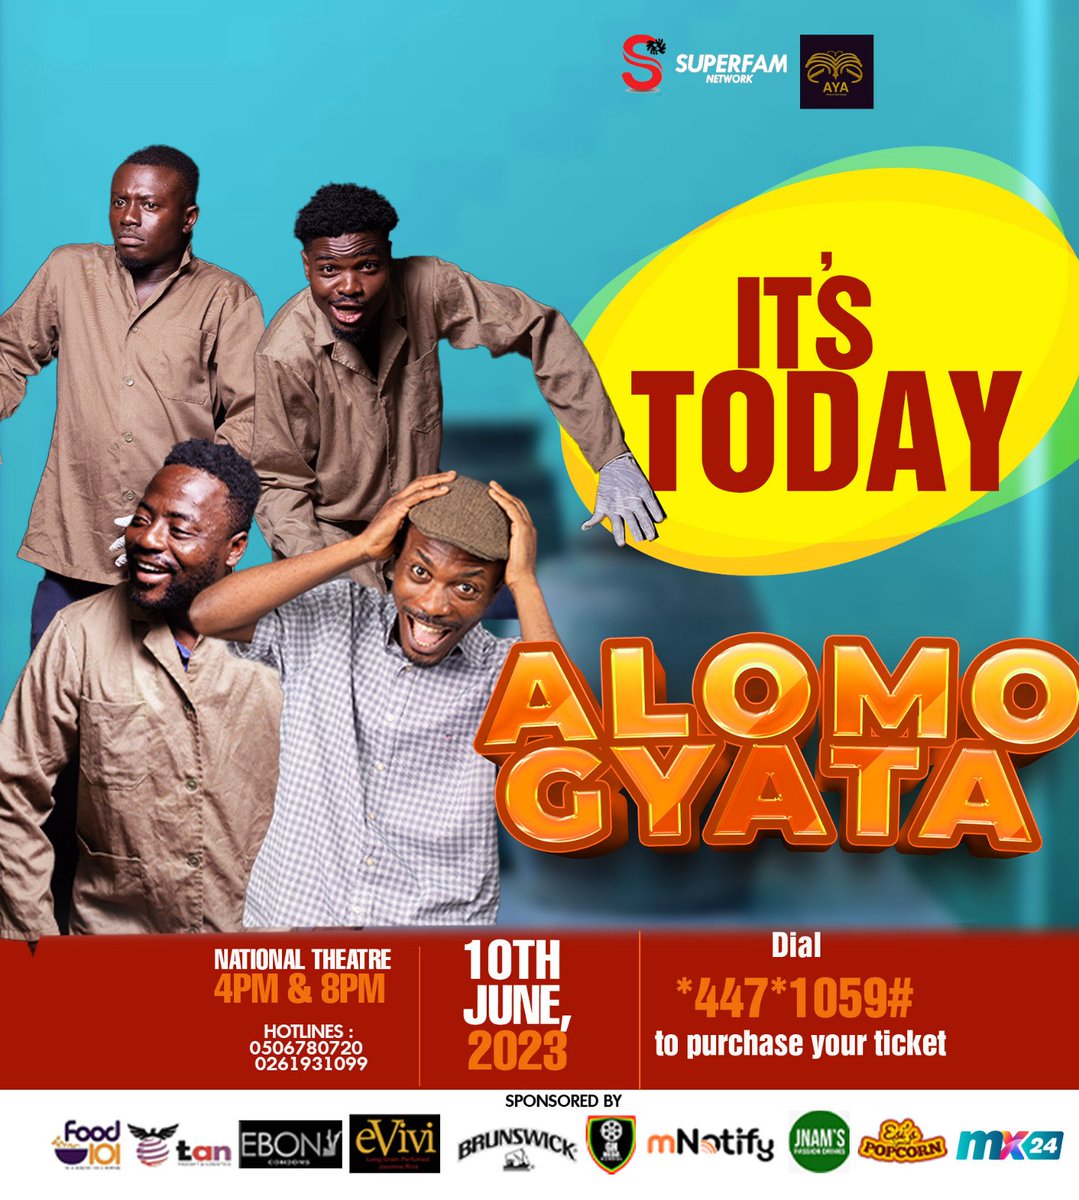 IT'S TODAY !!

Africa's first ever Dance Comedy play #ALOMOGYATA is Showing TODAY, Saturday at National Theatre 4pm and 8pm prompt.

Get ready for an overdose of laughter and unforgettable experience.

Dial *447*1059# to purchase your ticket or WhatsApp 0261931099

#AlomoGyata